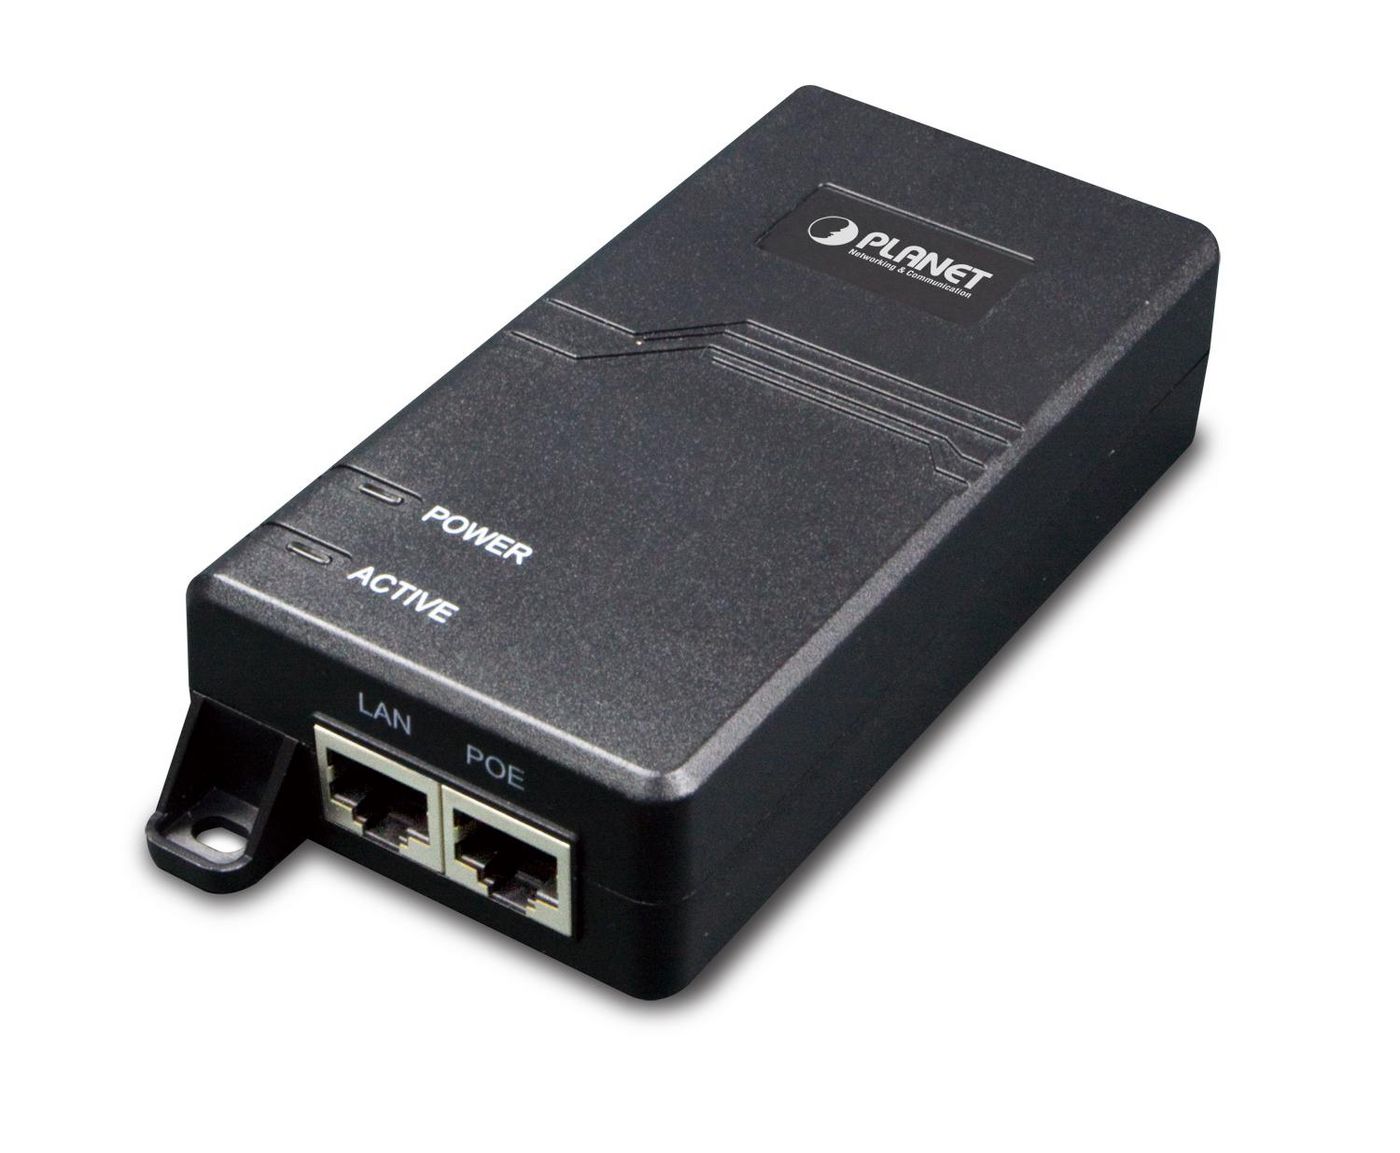 Planet POE-163-UK IEEE802.3at High Power PoE+ 